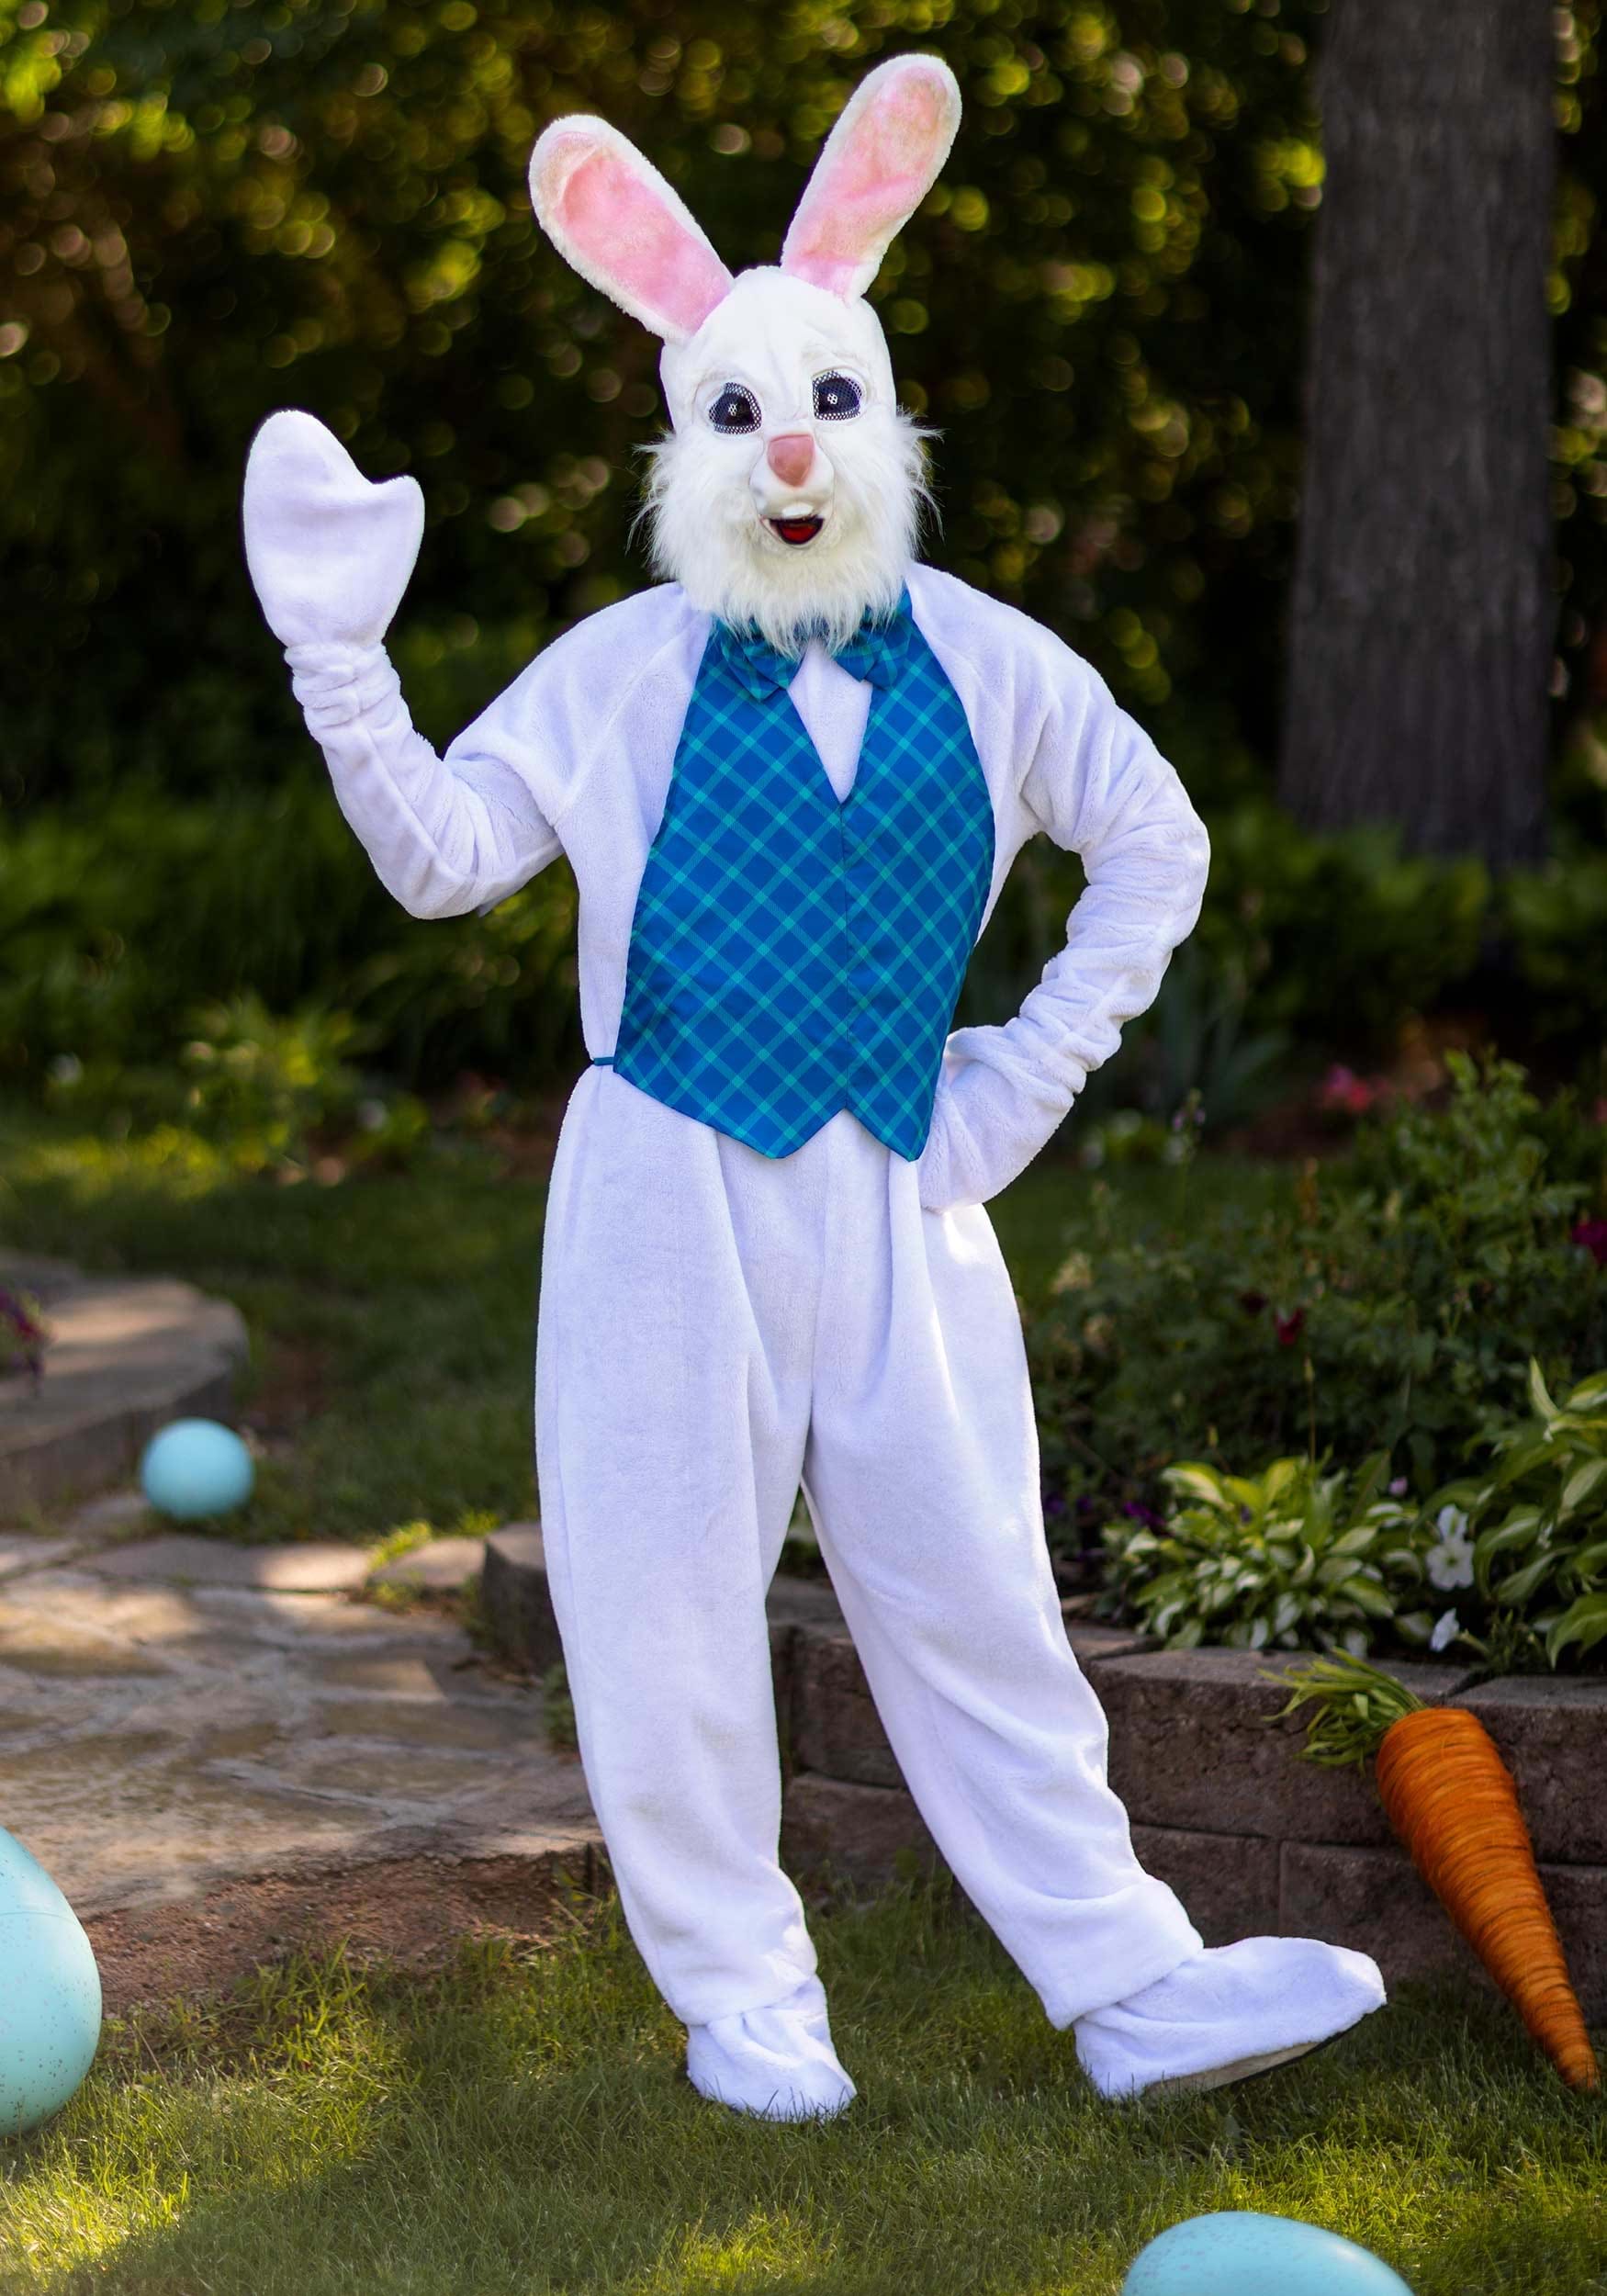 Adult Easter Bunny Costume